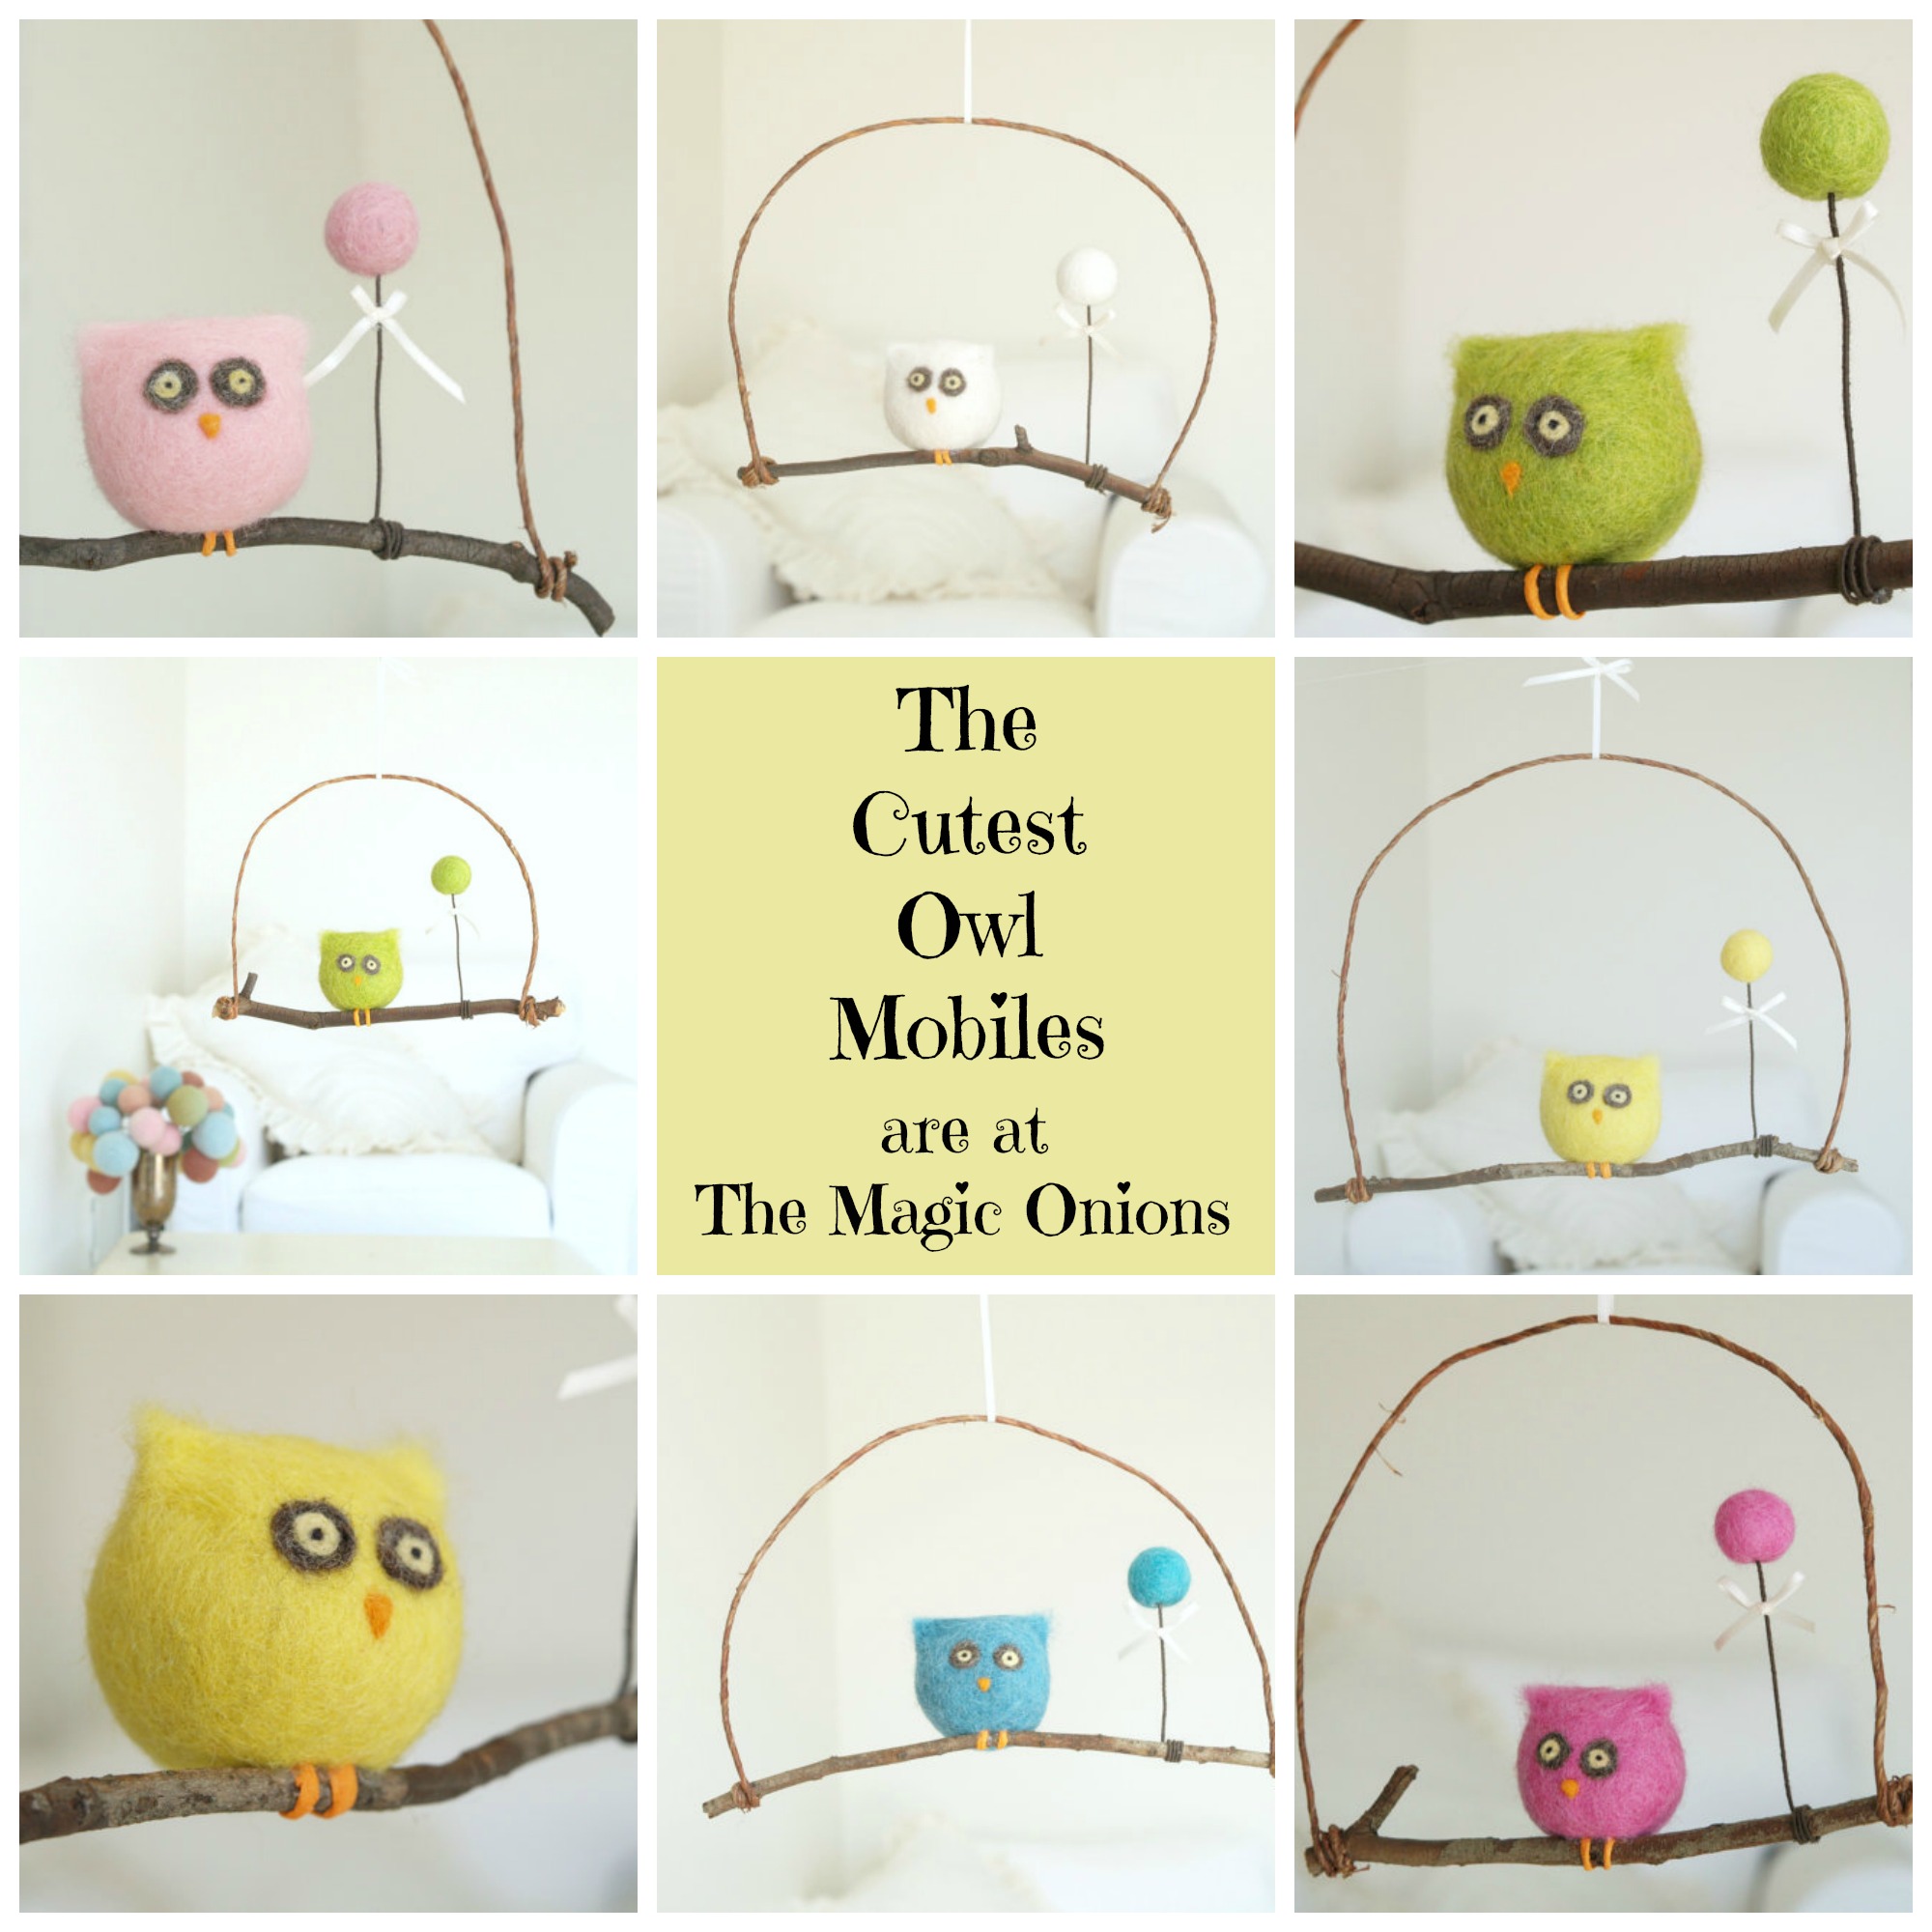 Cutest owl mobiles in town : Needle Felted from wool : www.theMagicOnions.com/shop/